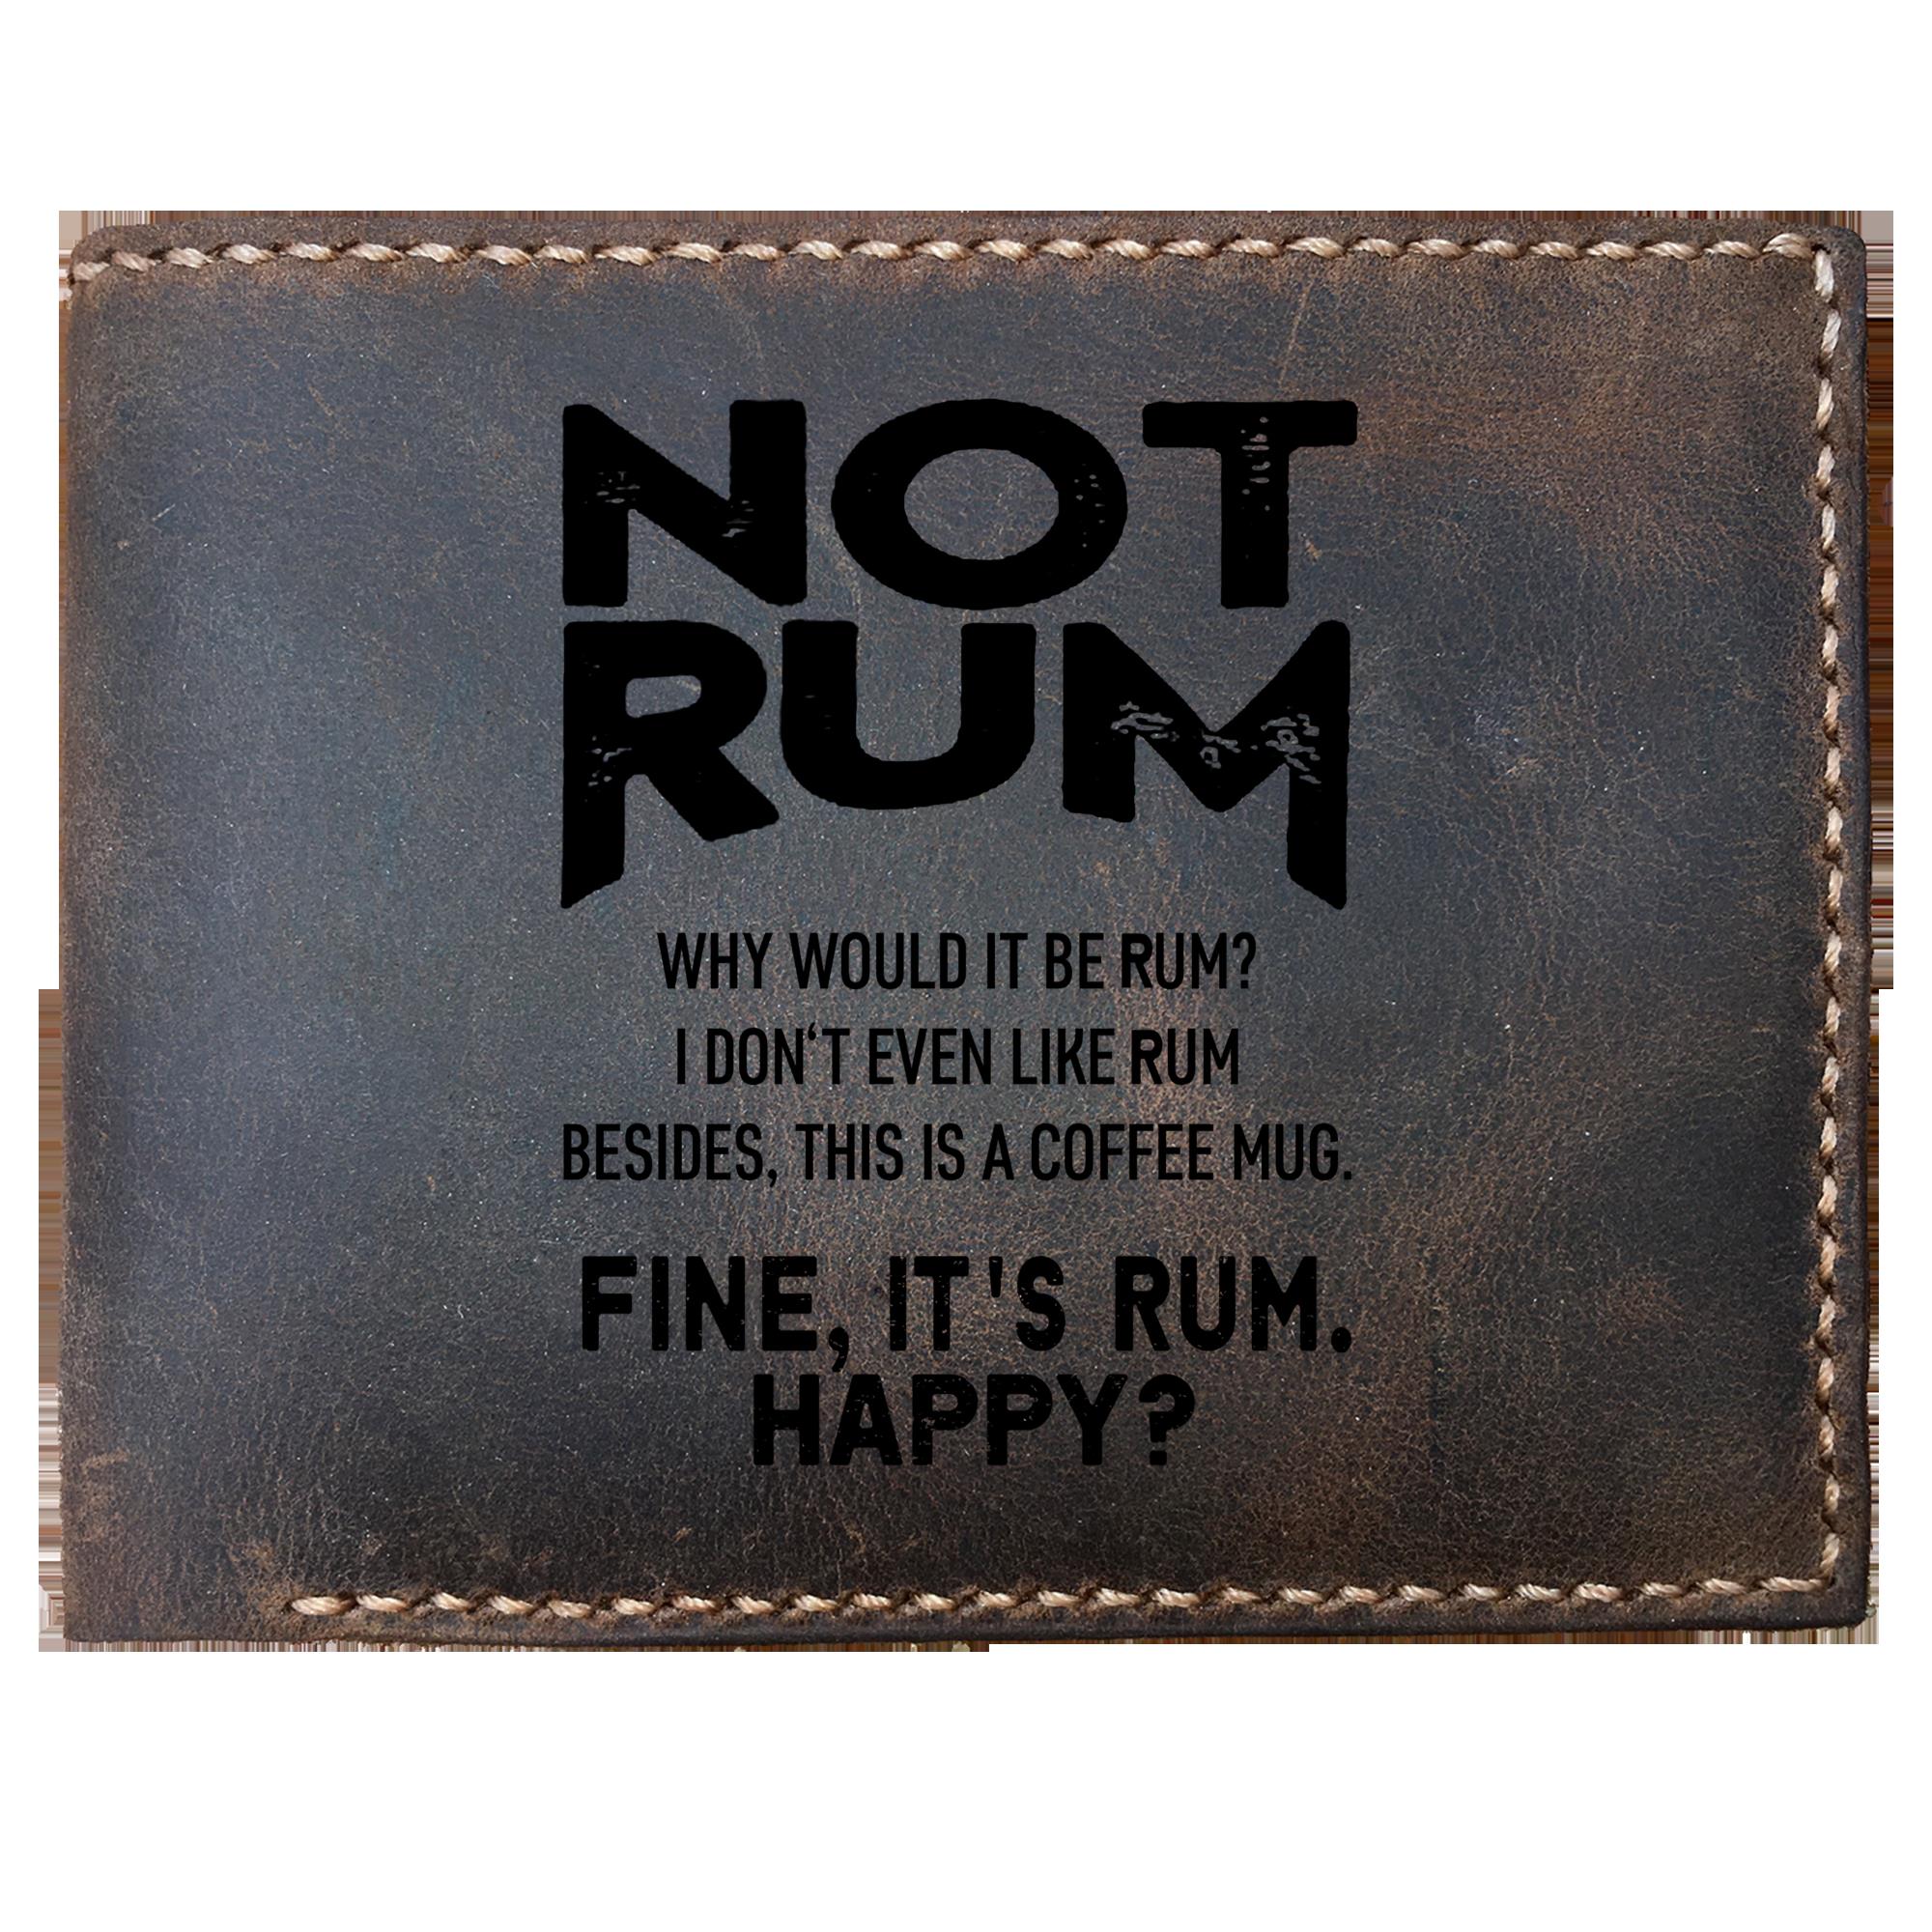 Skitongifts Funny Custom Laser Engraved Bifold Leather Wallet For Men, This Is Not Rum Why Would It Be Rum. Fine, It's Rum. Happy